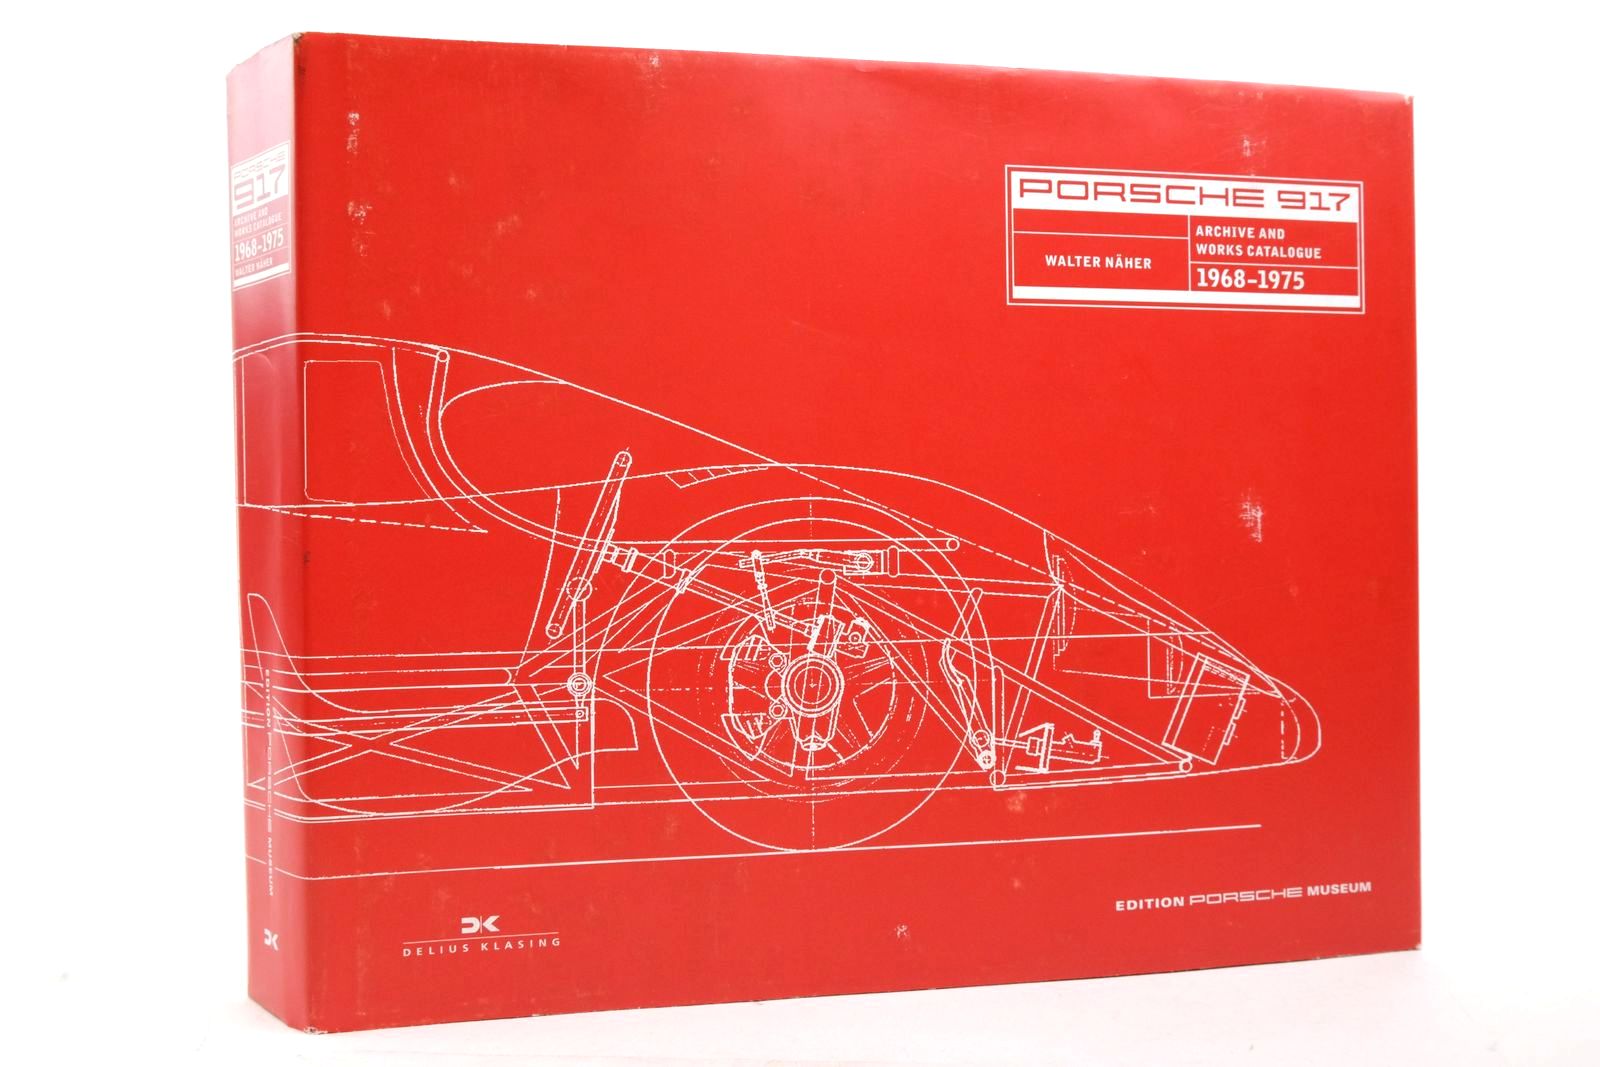 Photo of PORSCHE 917 ARCHIVE AND WORKS CATALOGUE 1968-1975 written by Naher, Walter published by Delius Klasing Verlag (STOCK CODE: 2136580)  for sale by Stella & Rose's Books